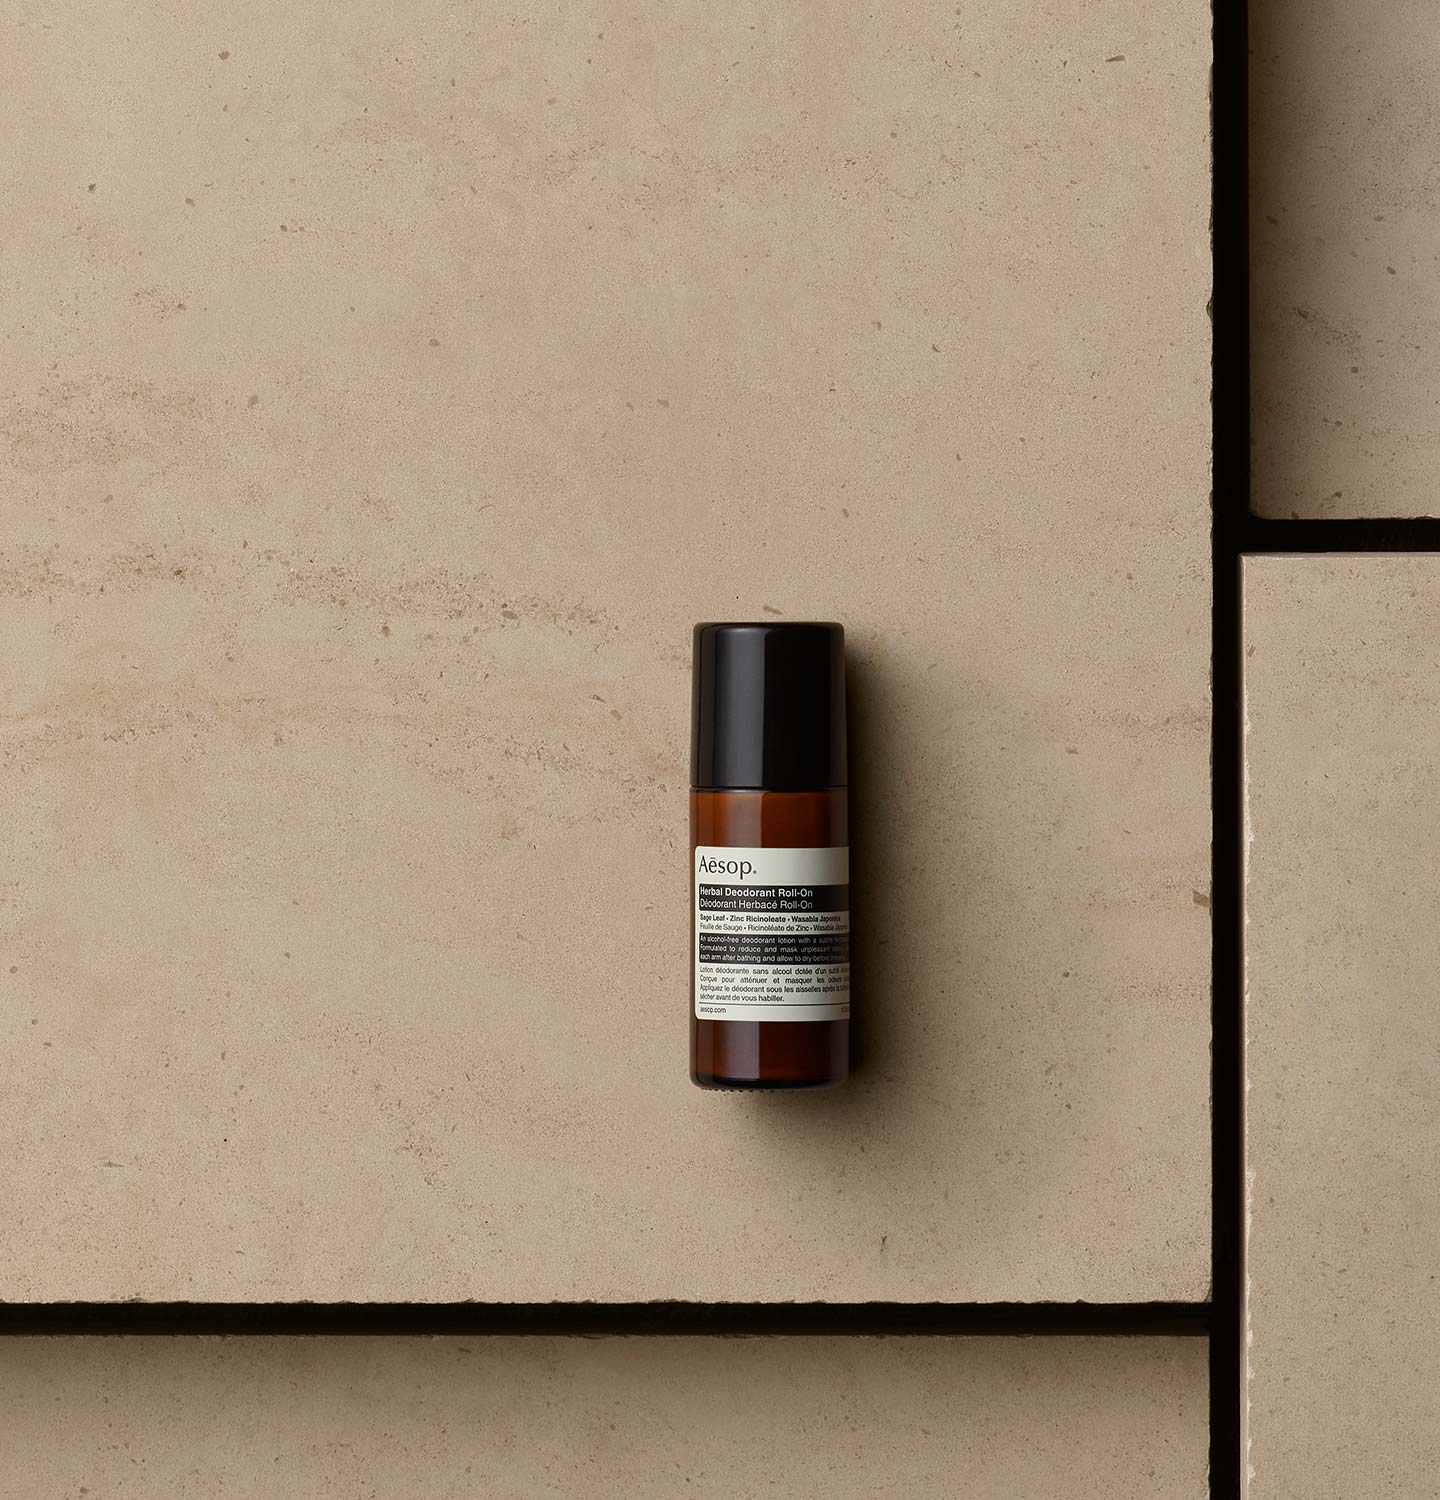 Aesop Herbal Deodorant Roll-On in amber bottle arranged on a beige textured surface.